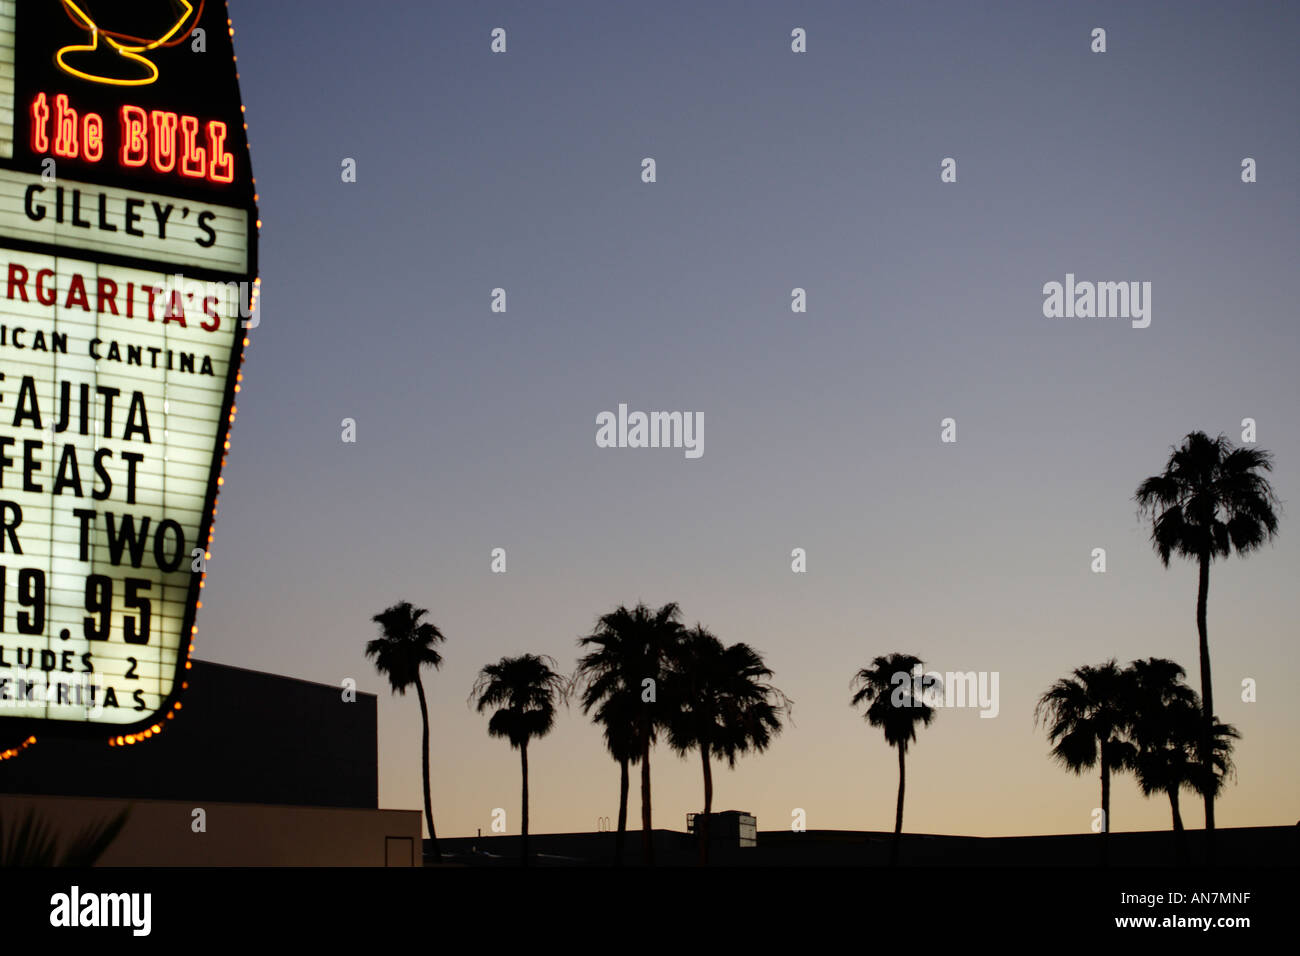 Las Vegas view palm trees at sunset and Casino sign Stock Photo